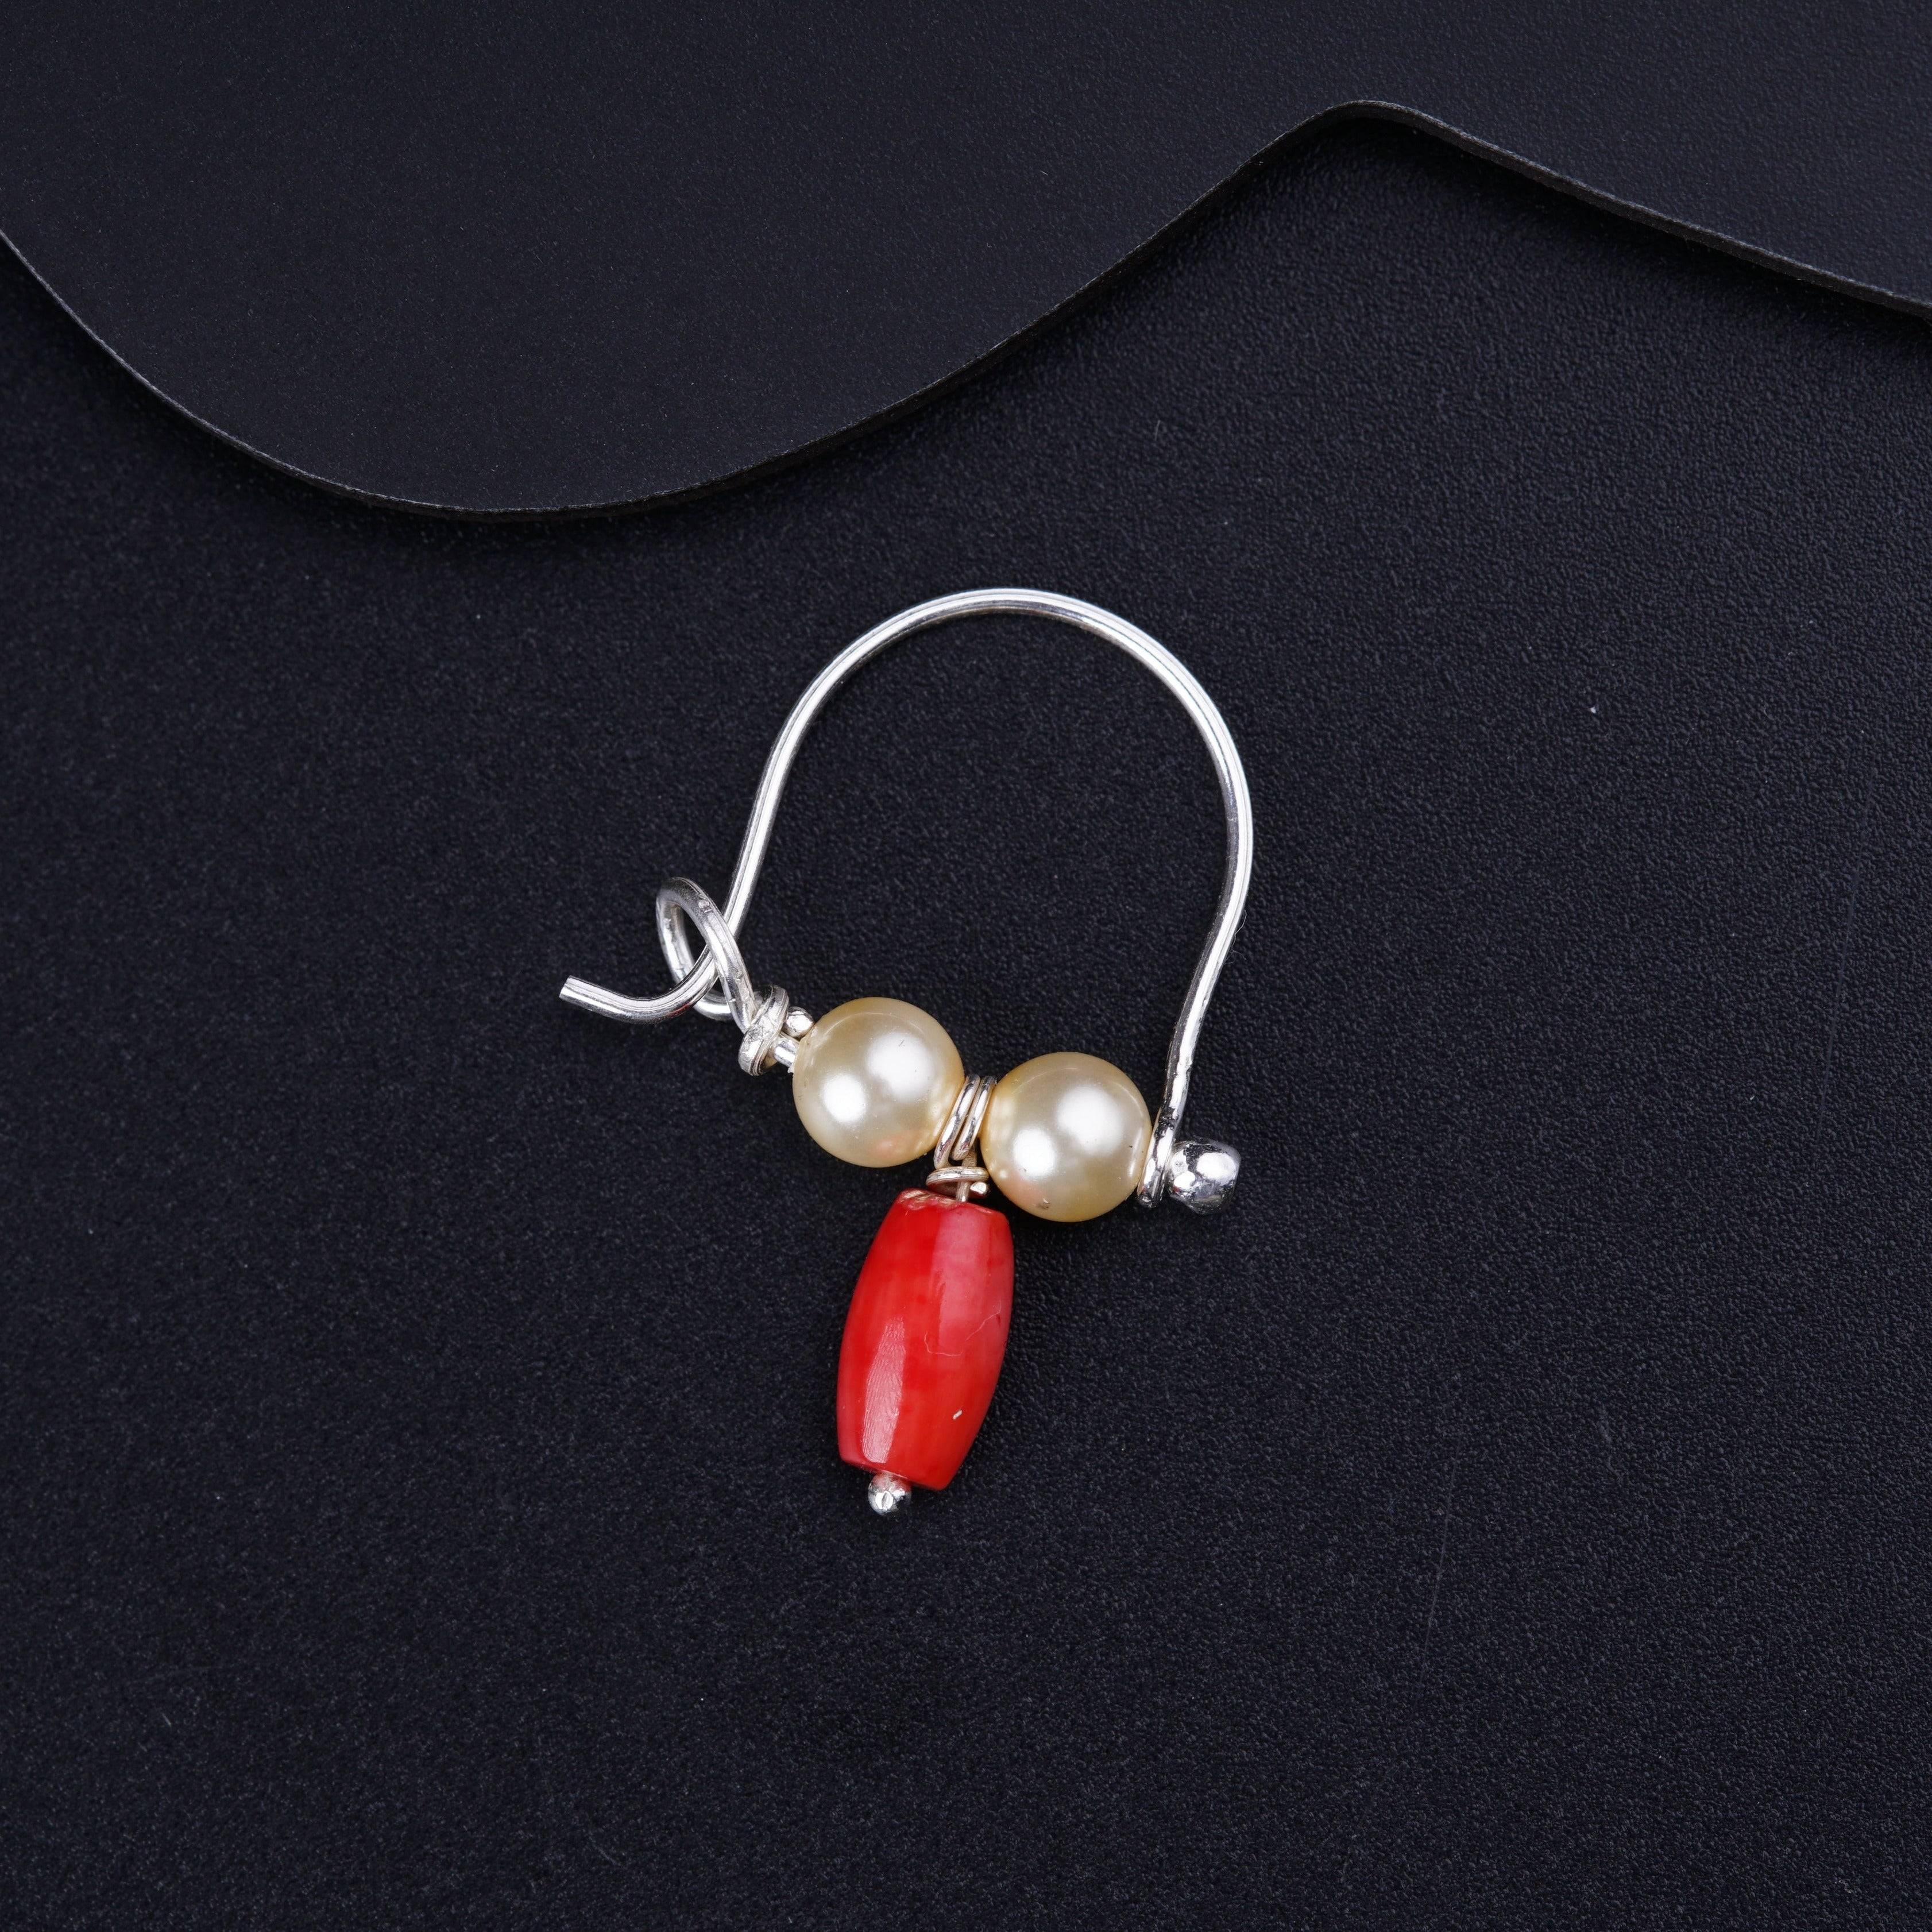 a pair of earrings with a red and white bead